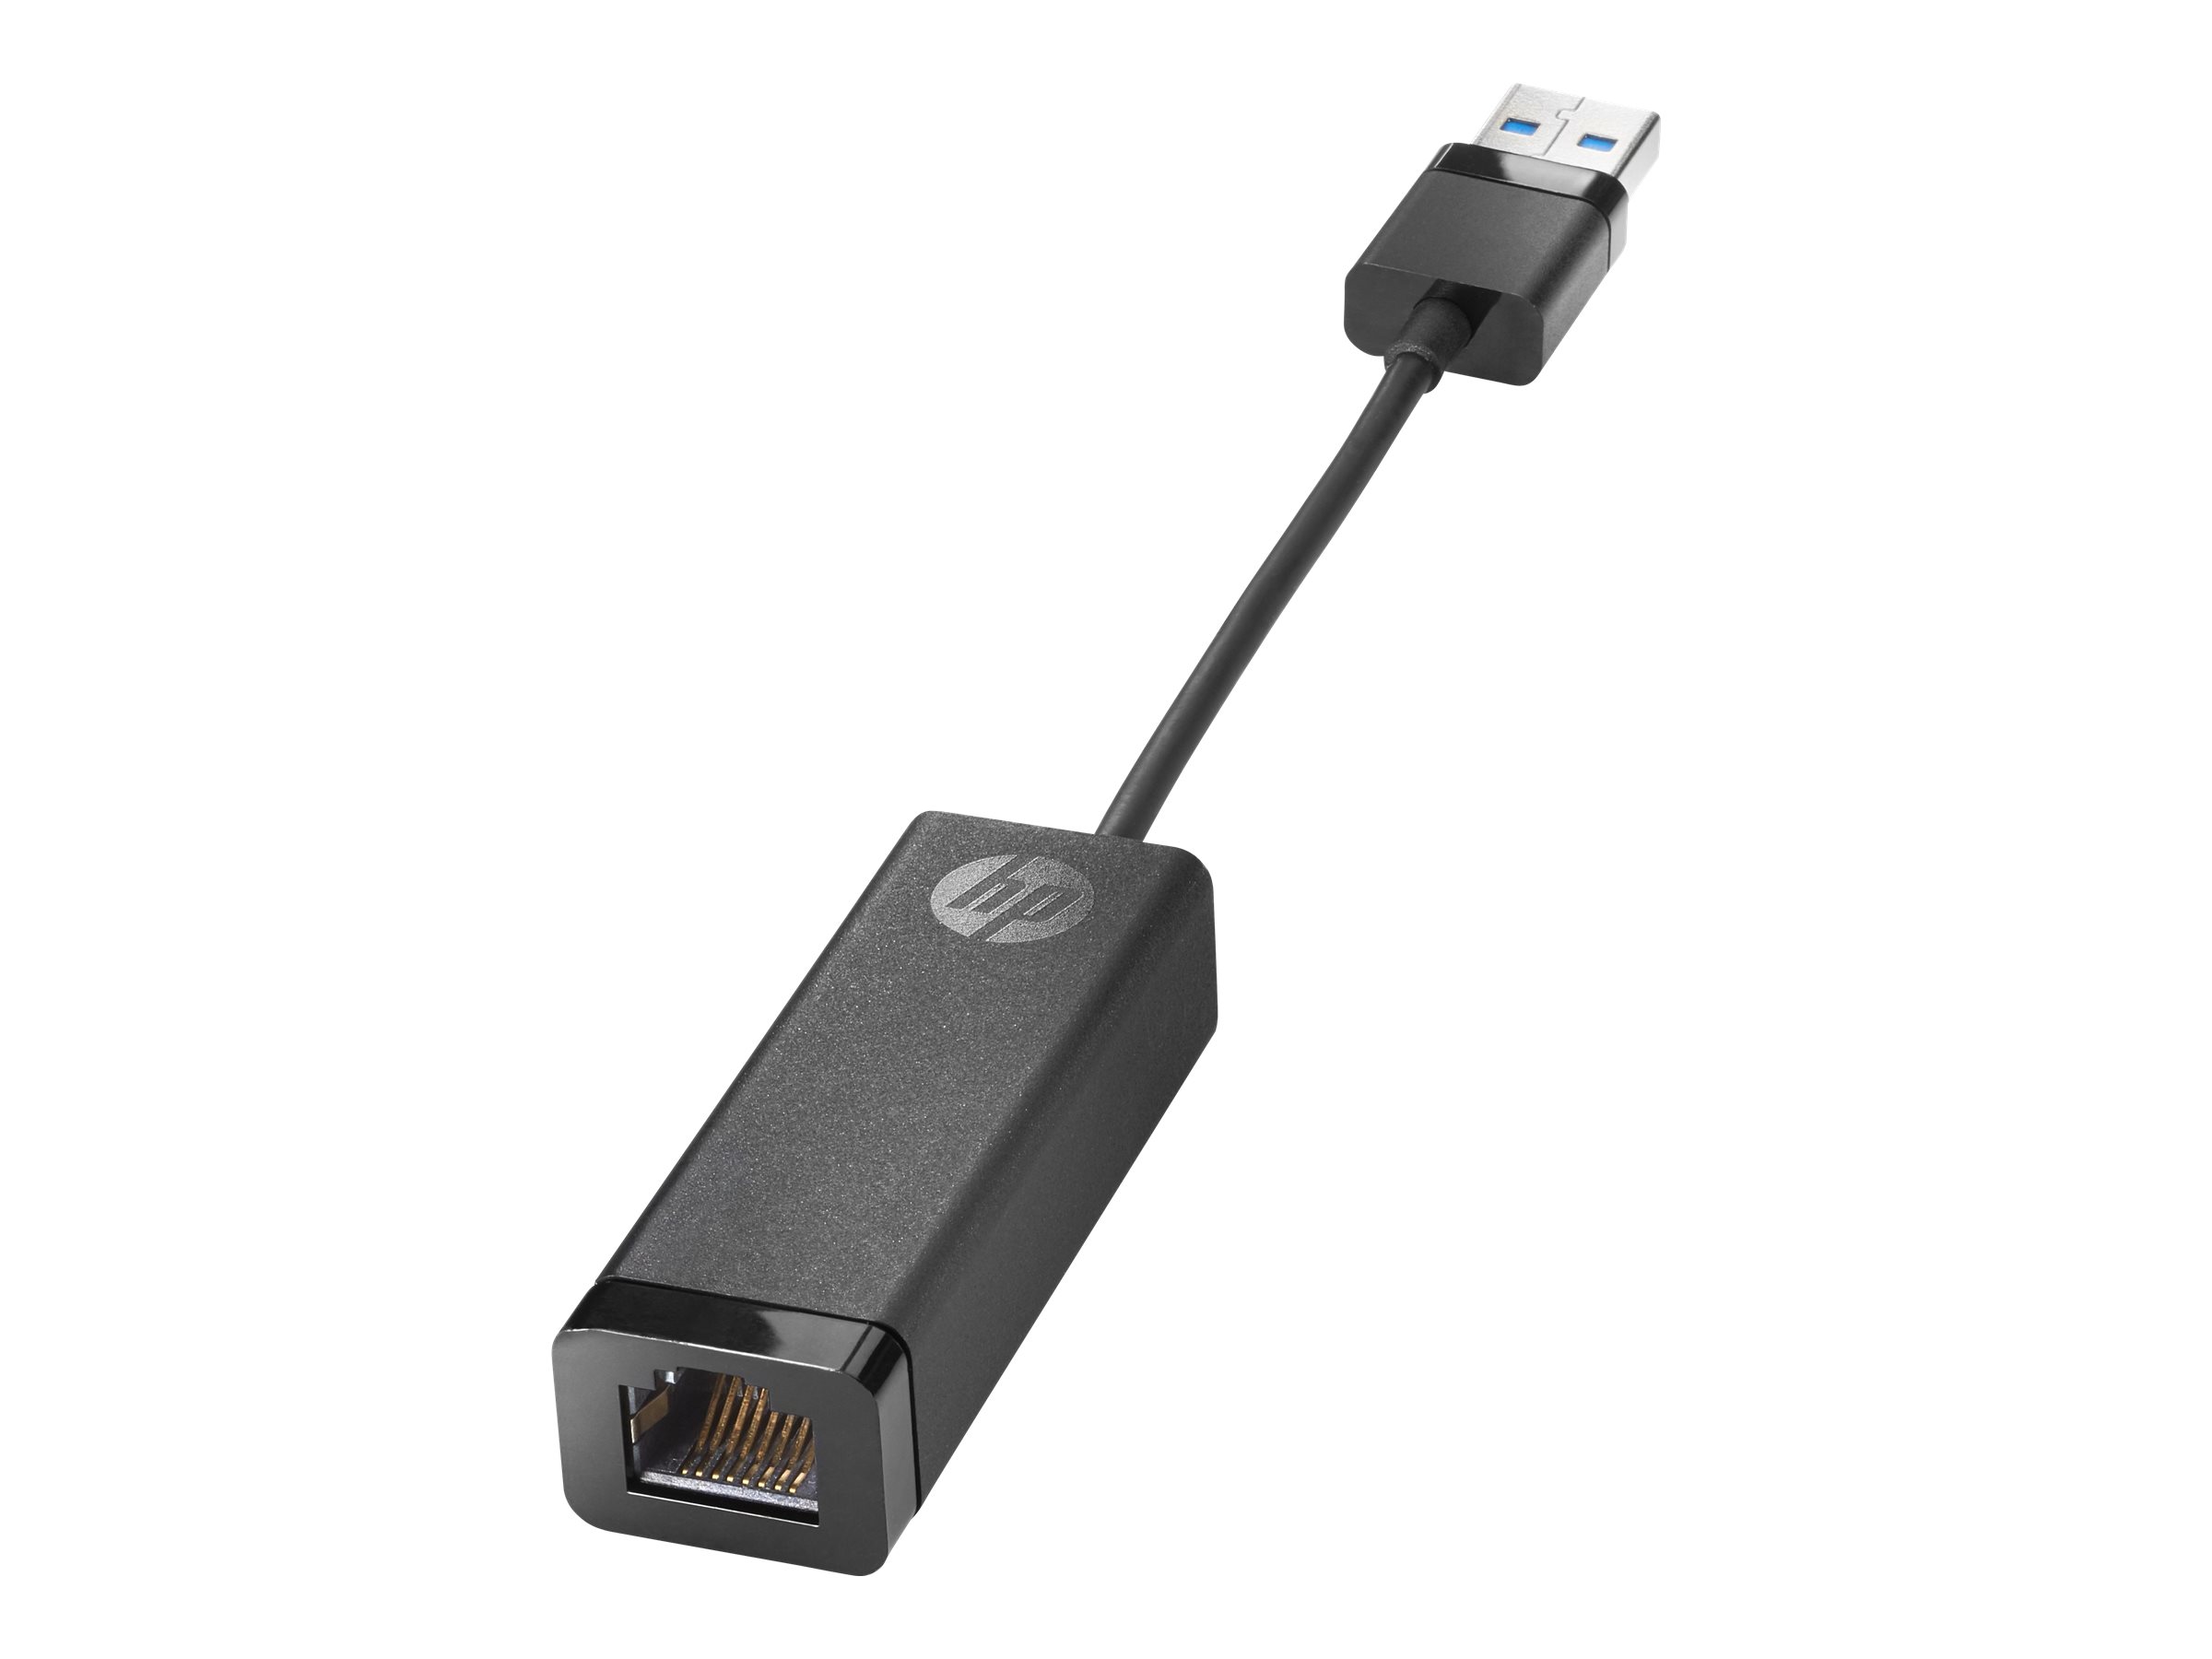 HP USB 3.0 to Gig RJ45 Adapter G2 (4Z7Z7AA)